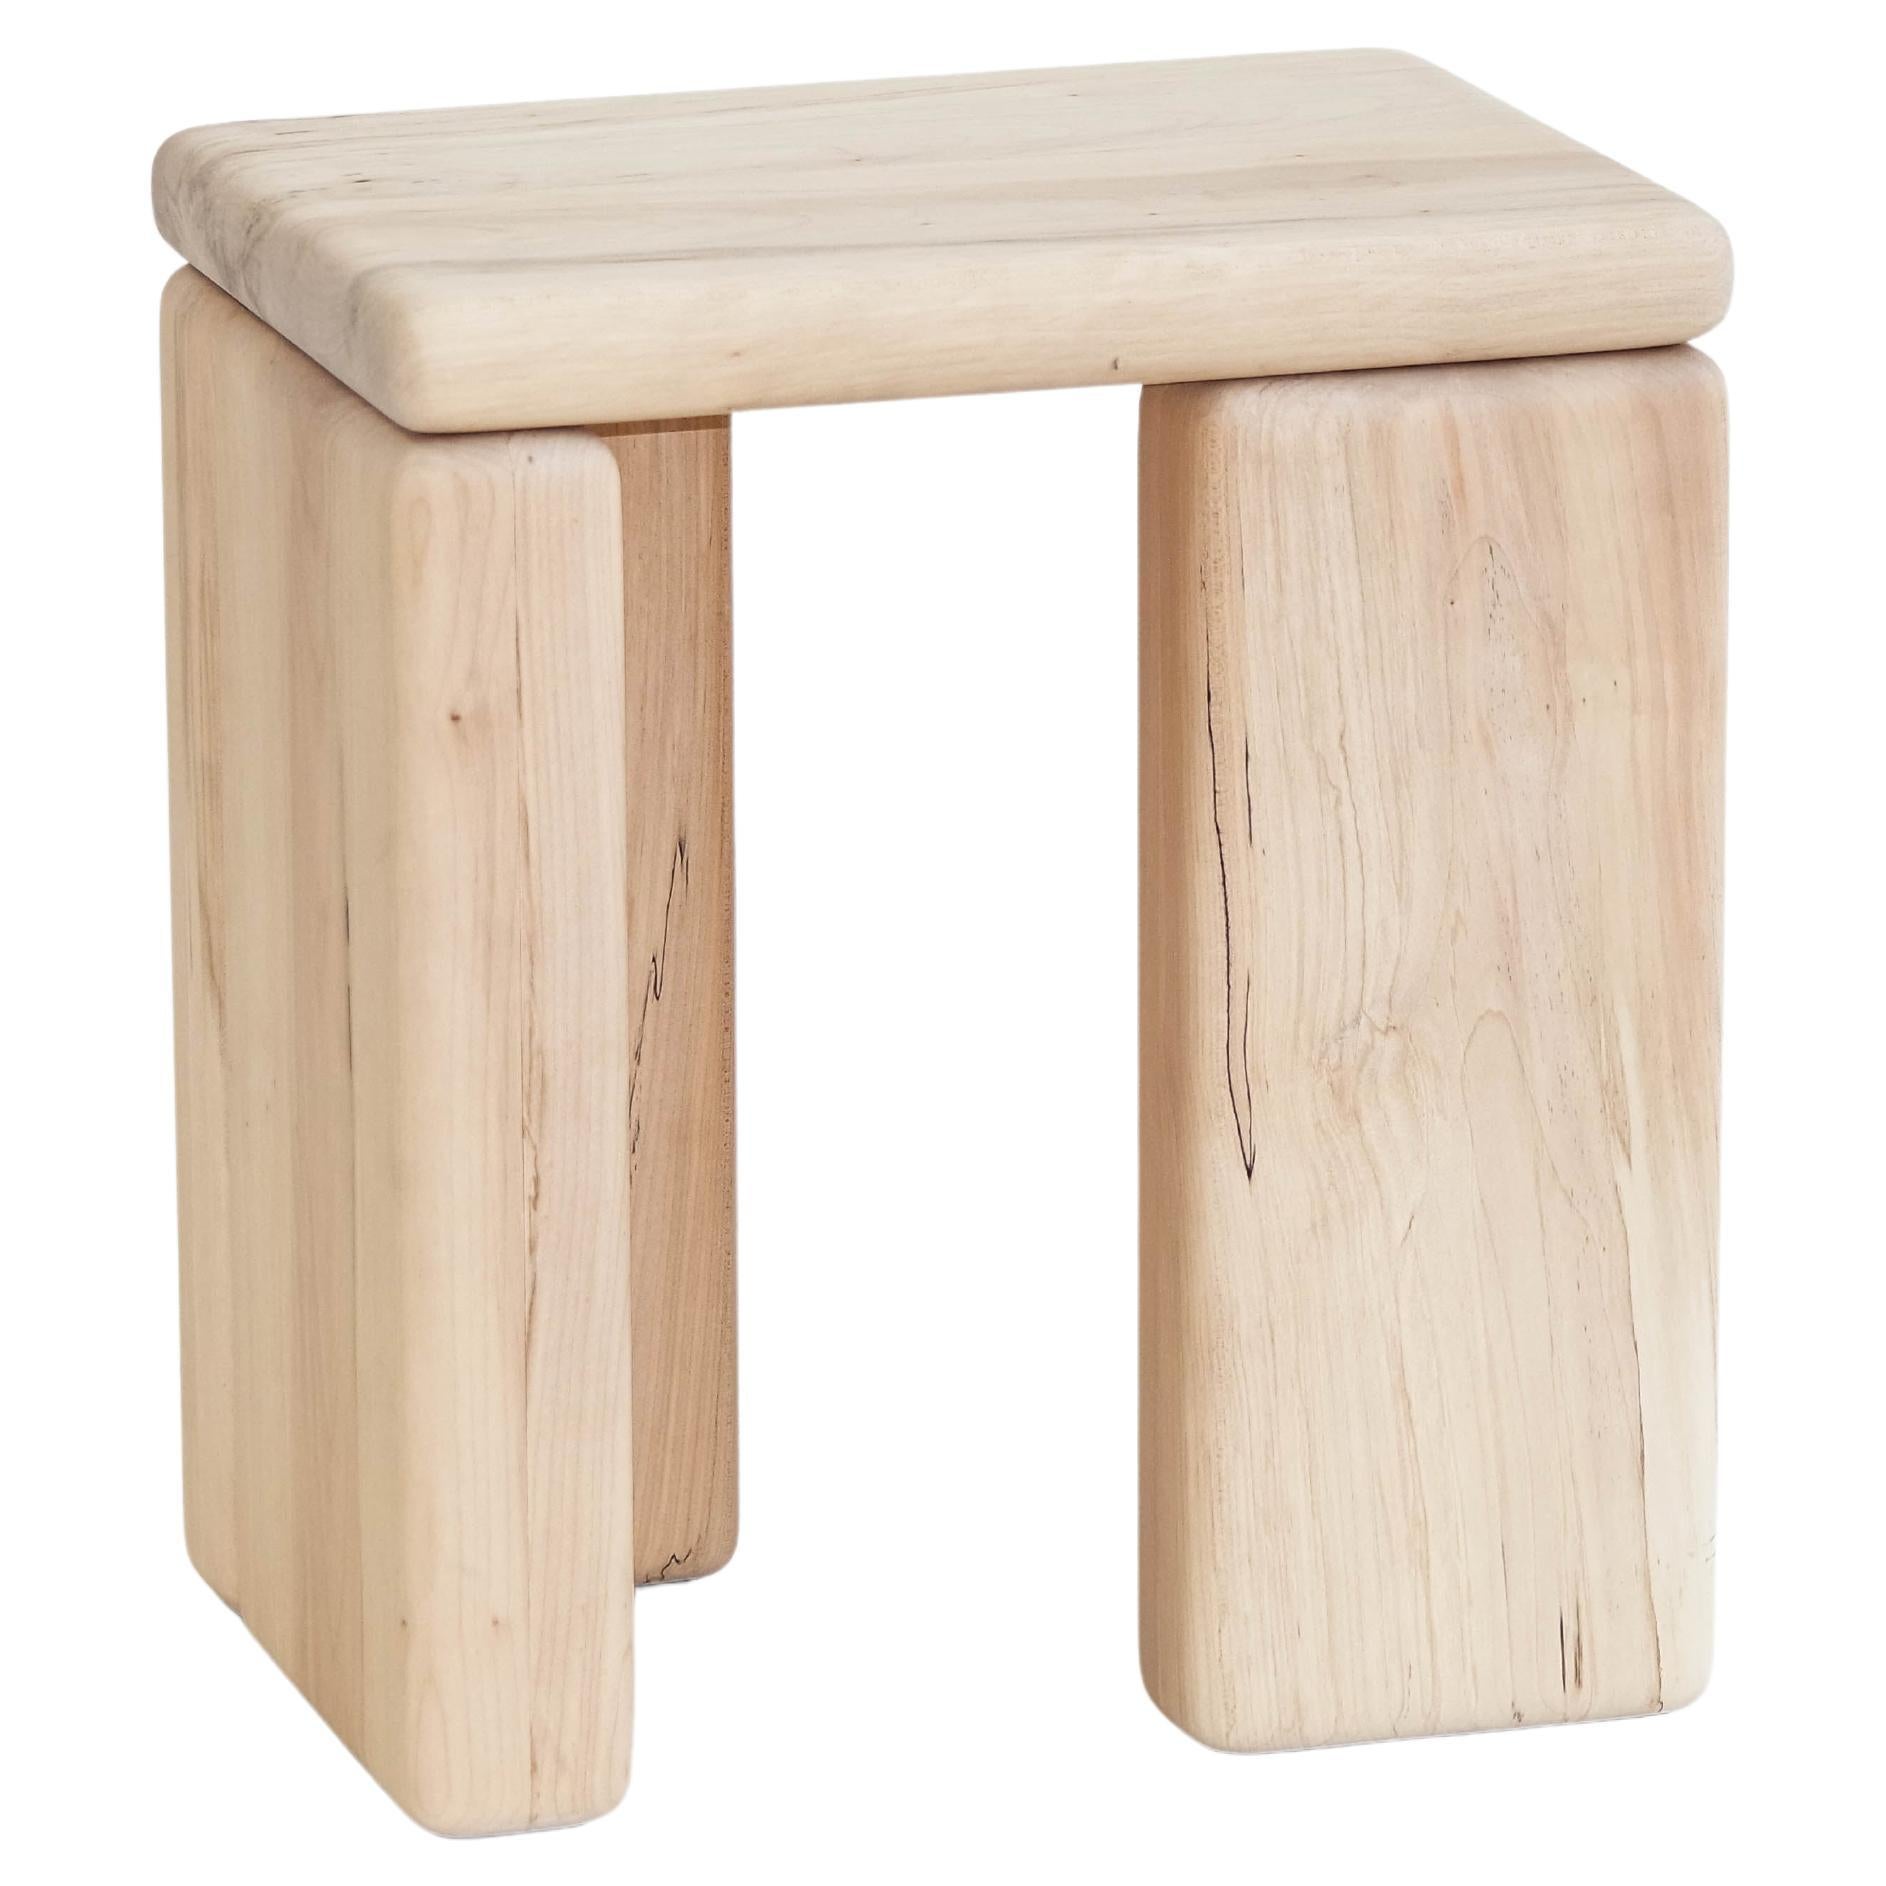 Timber Stool Maple by Onno Adriaanse